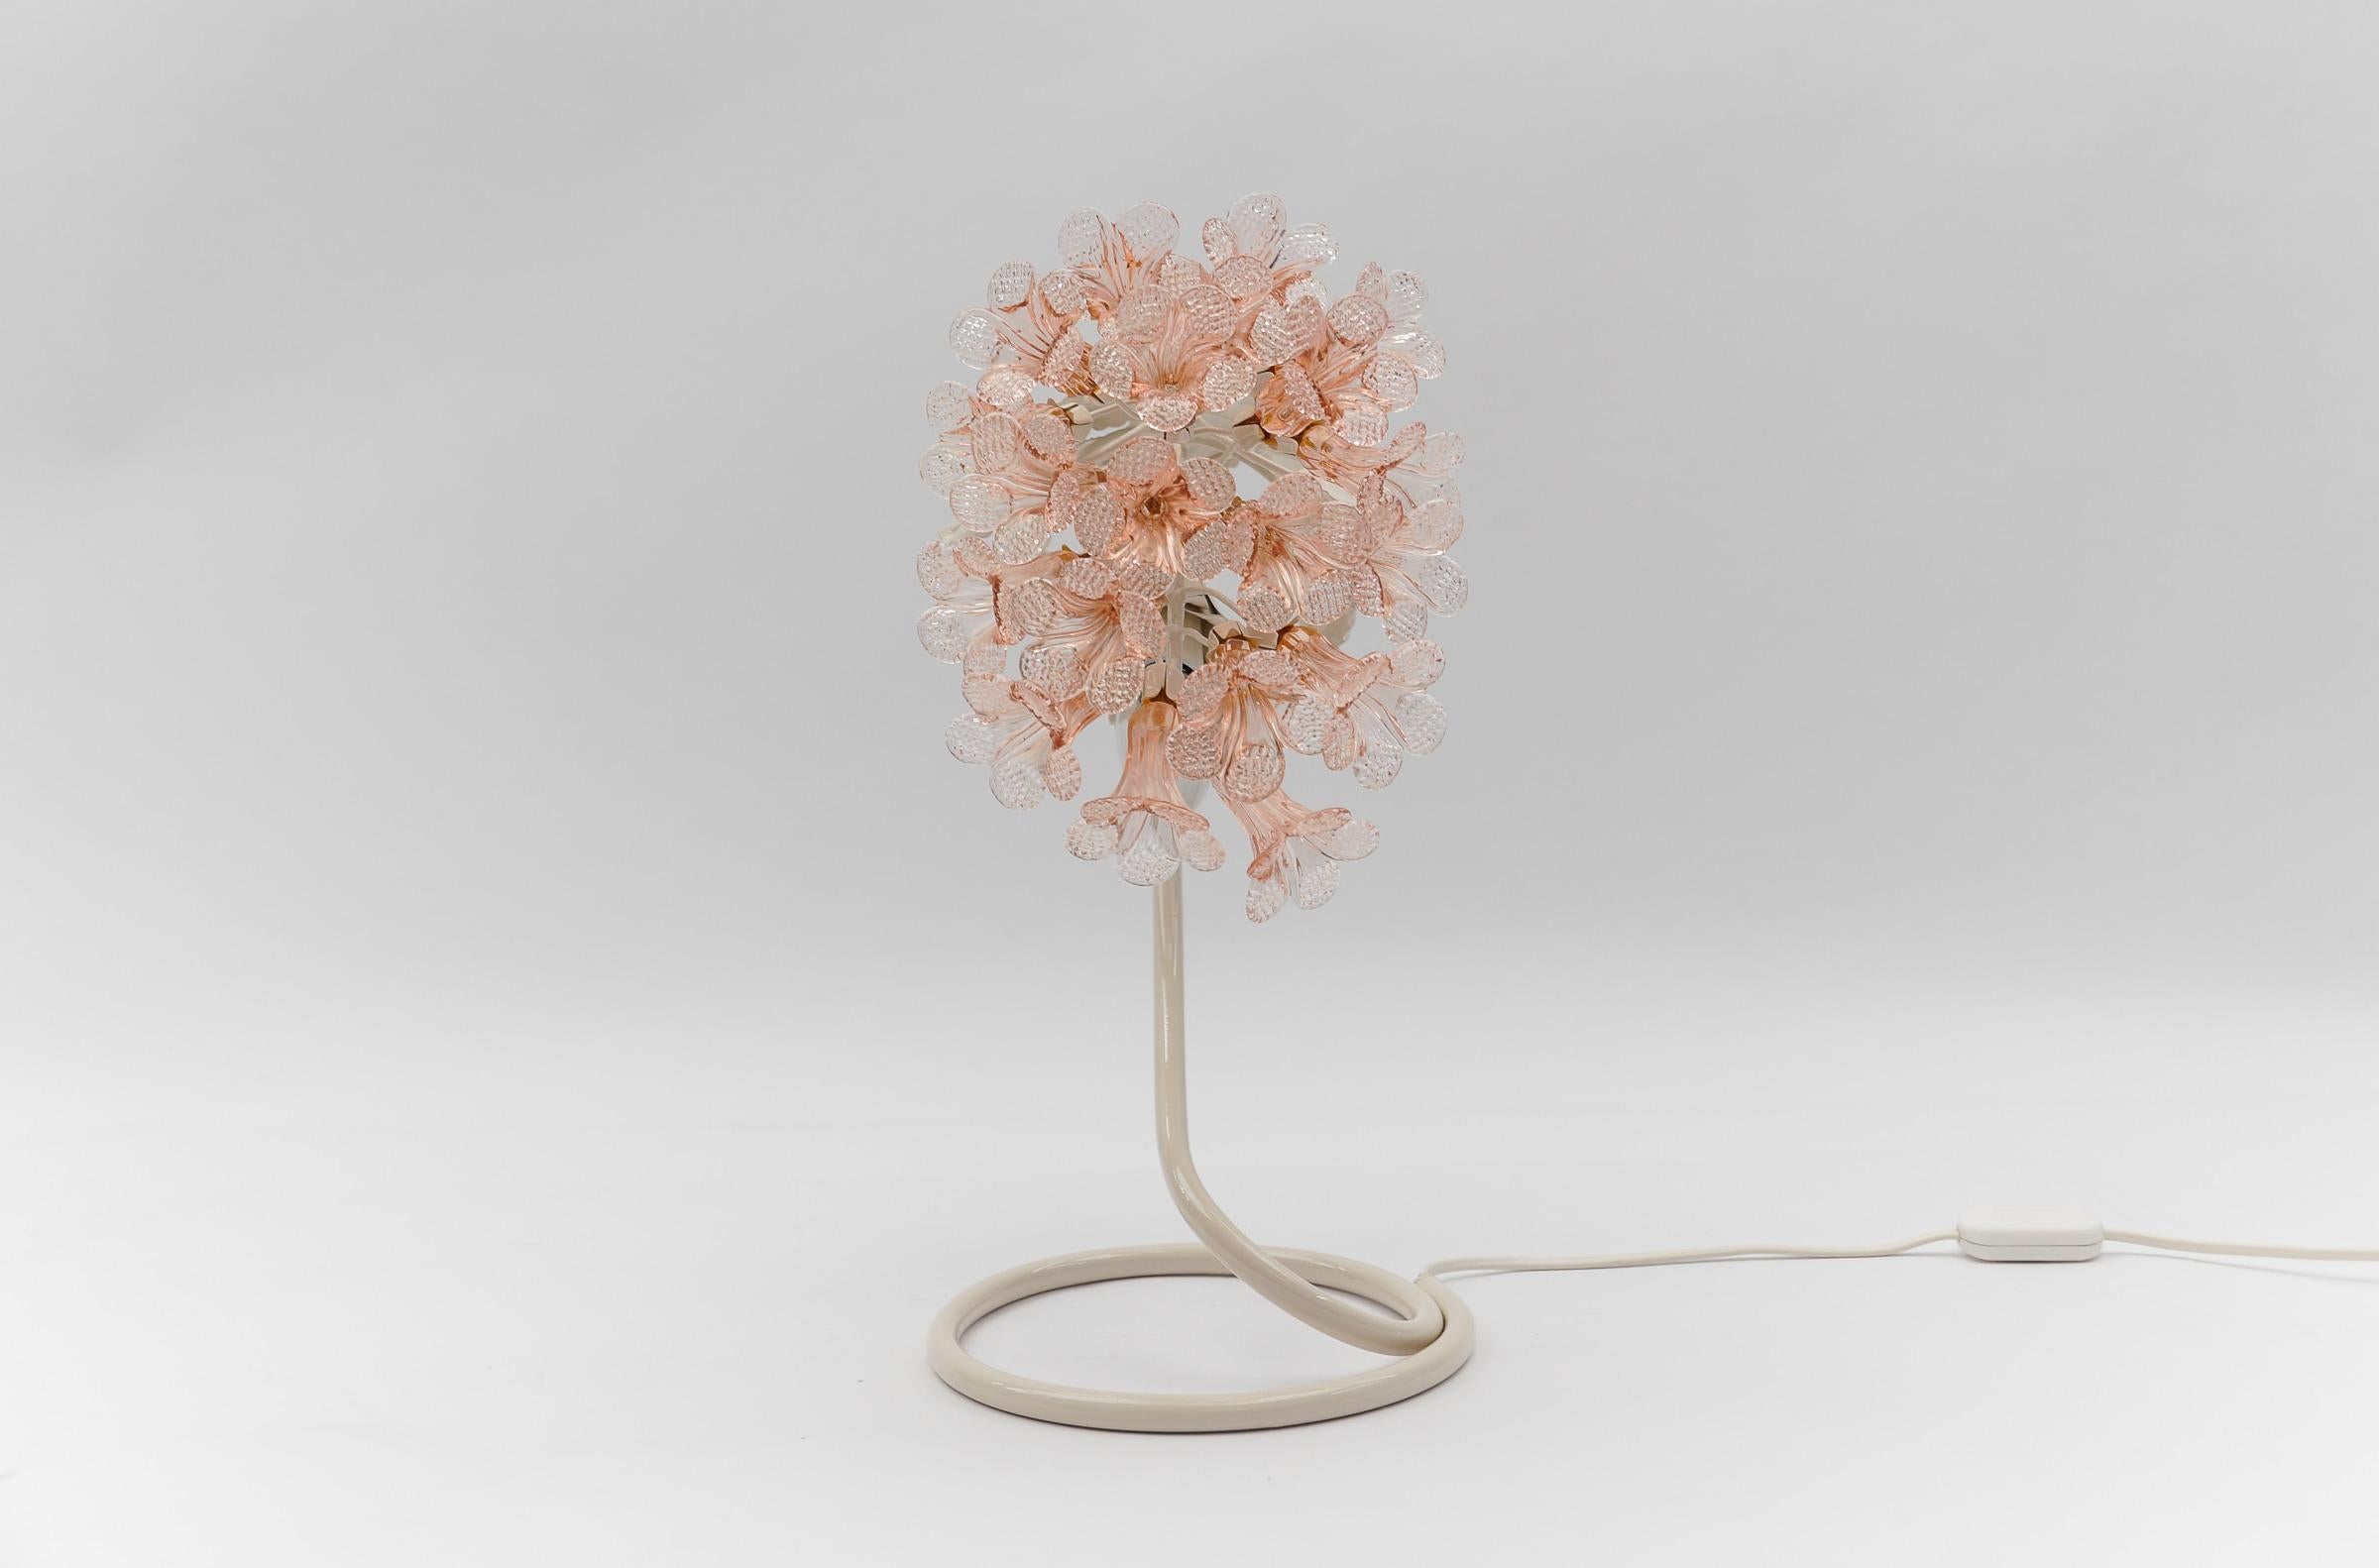 Italian Modern Table Lamp made in Pink Murano Glass Flowers, 1960s Italy.

Dimension
Height: 16,14 in (41 cm)
Width: 8.26 in (21 cm)
Depth: 11.82 in (30 cm)

The lamp needs 1 x E14 / E15 Edison screw fit bulb, is wired, and in working condition. It